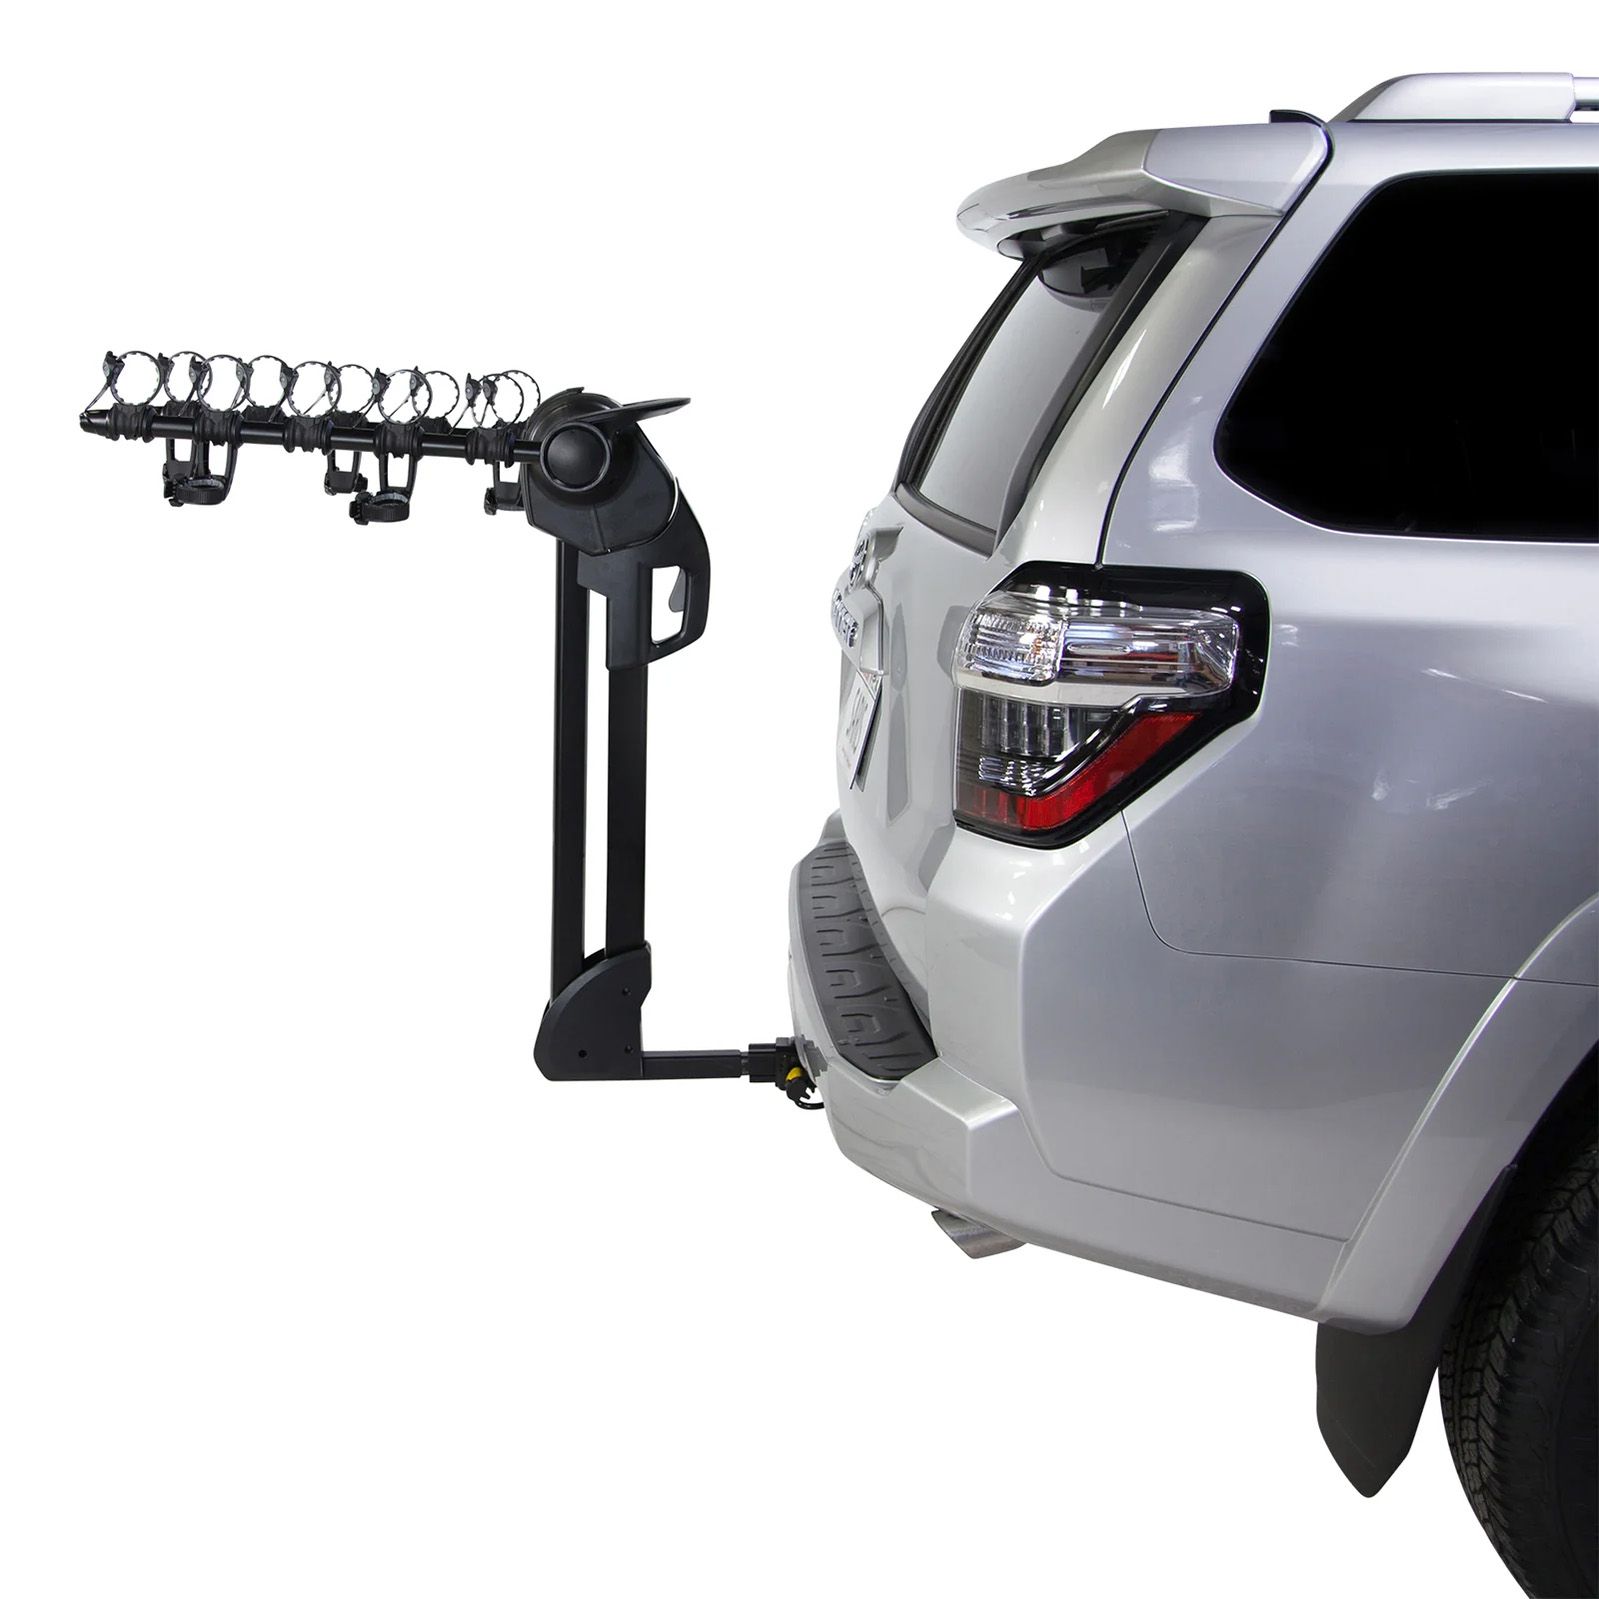 Photos - Roof Box Saris Glide Ex 5-Bike Hitch Rack with One-Handed Glide Operation 19SARAGLD 